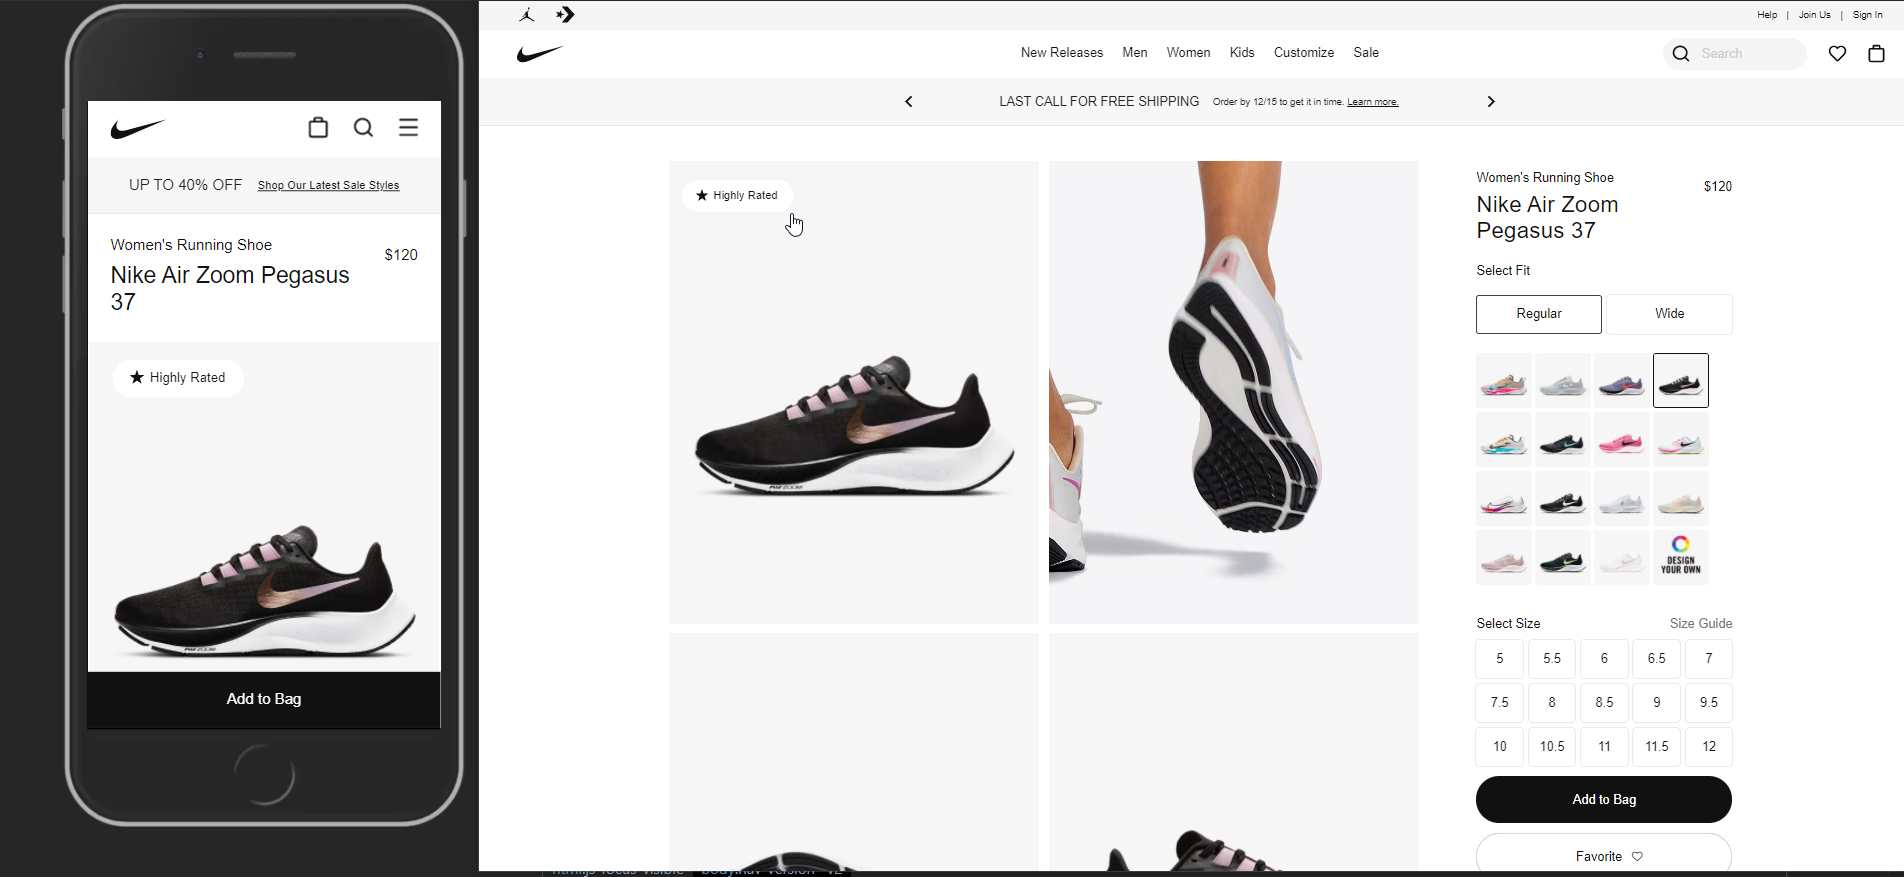 Nike.com's product pages are perfectly optimized towards the mobile browsers.